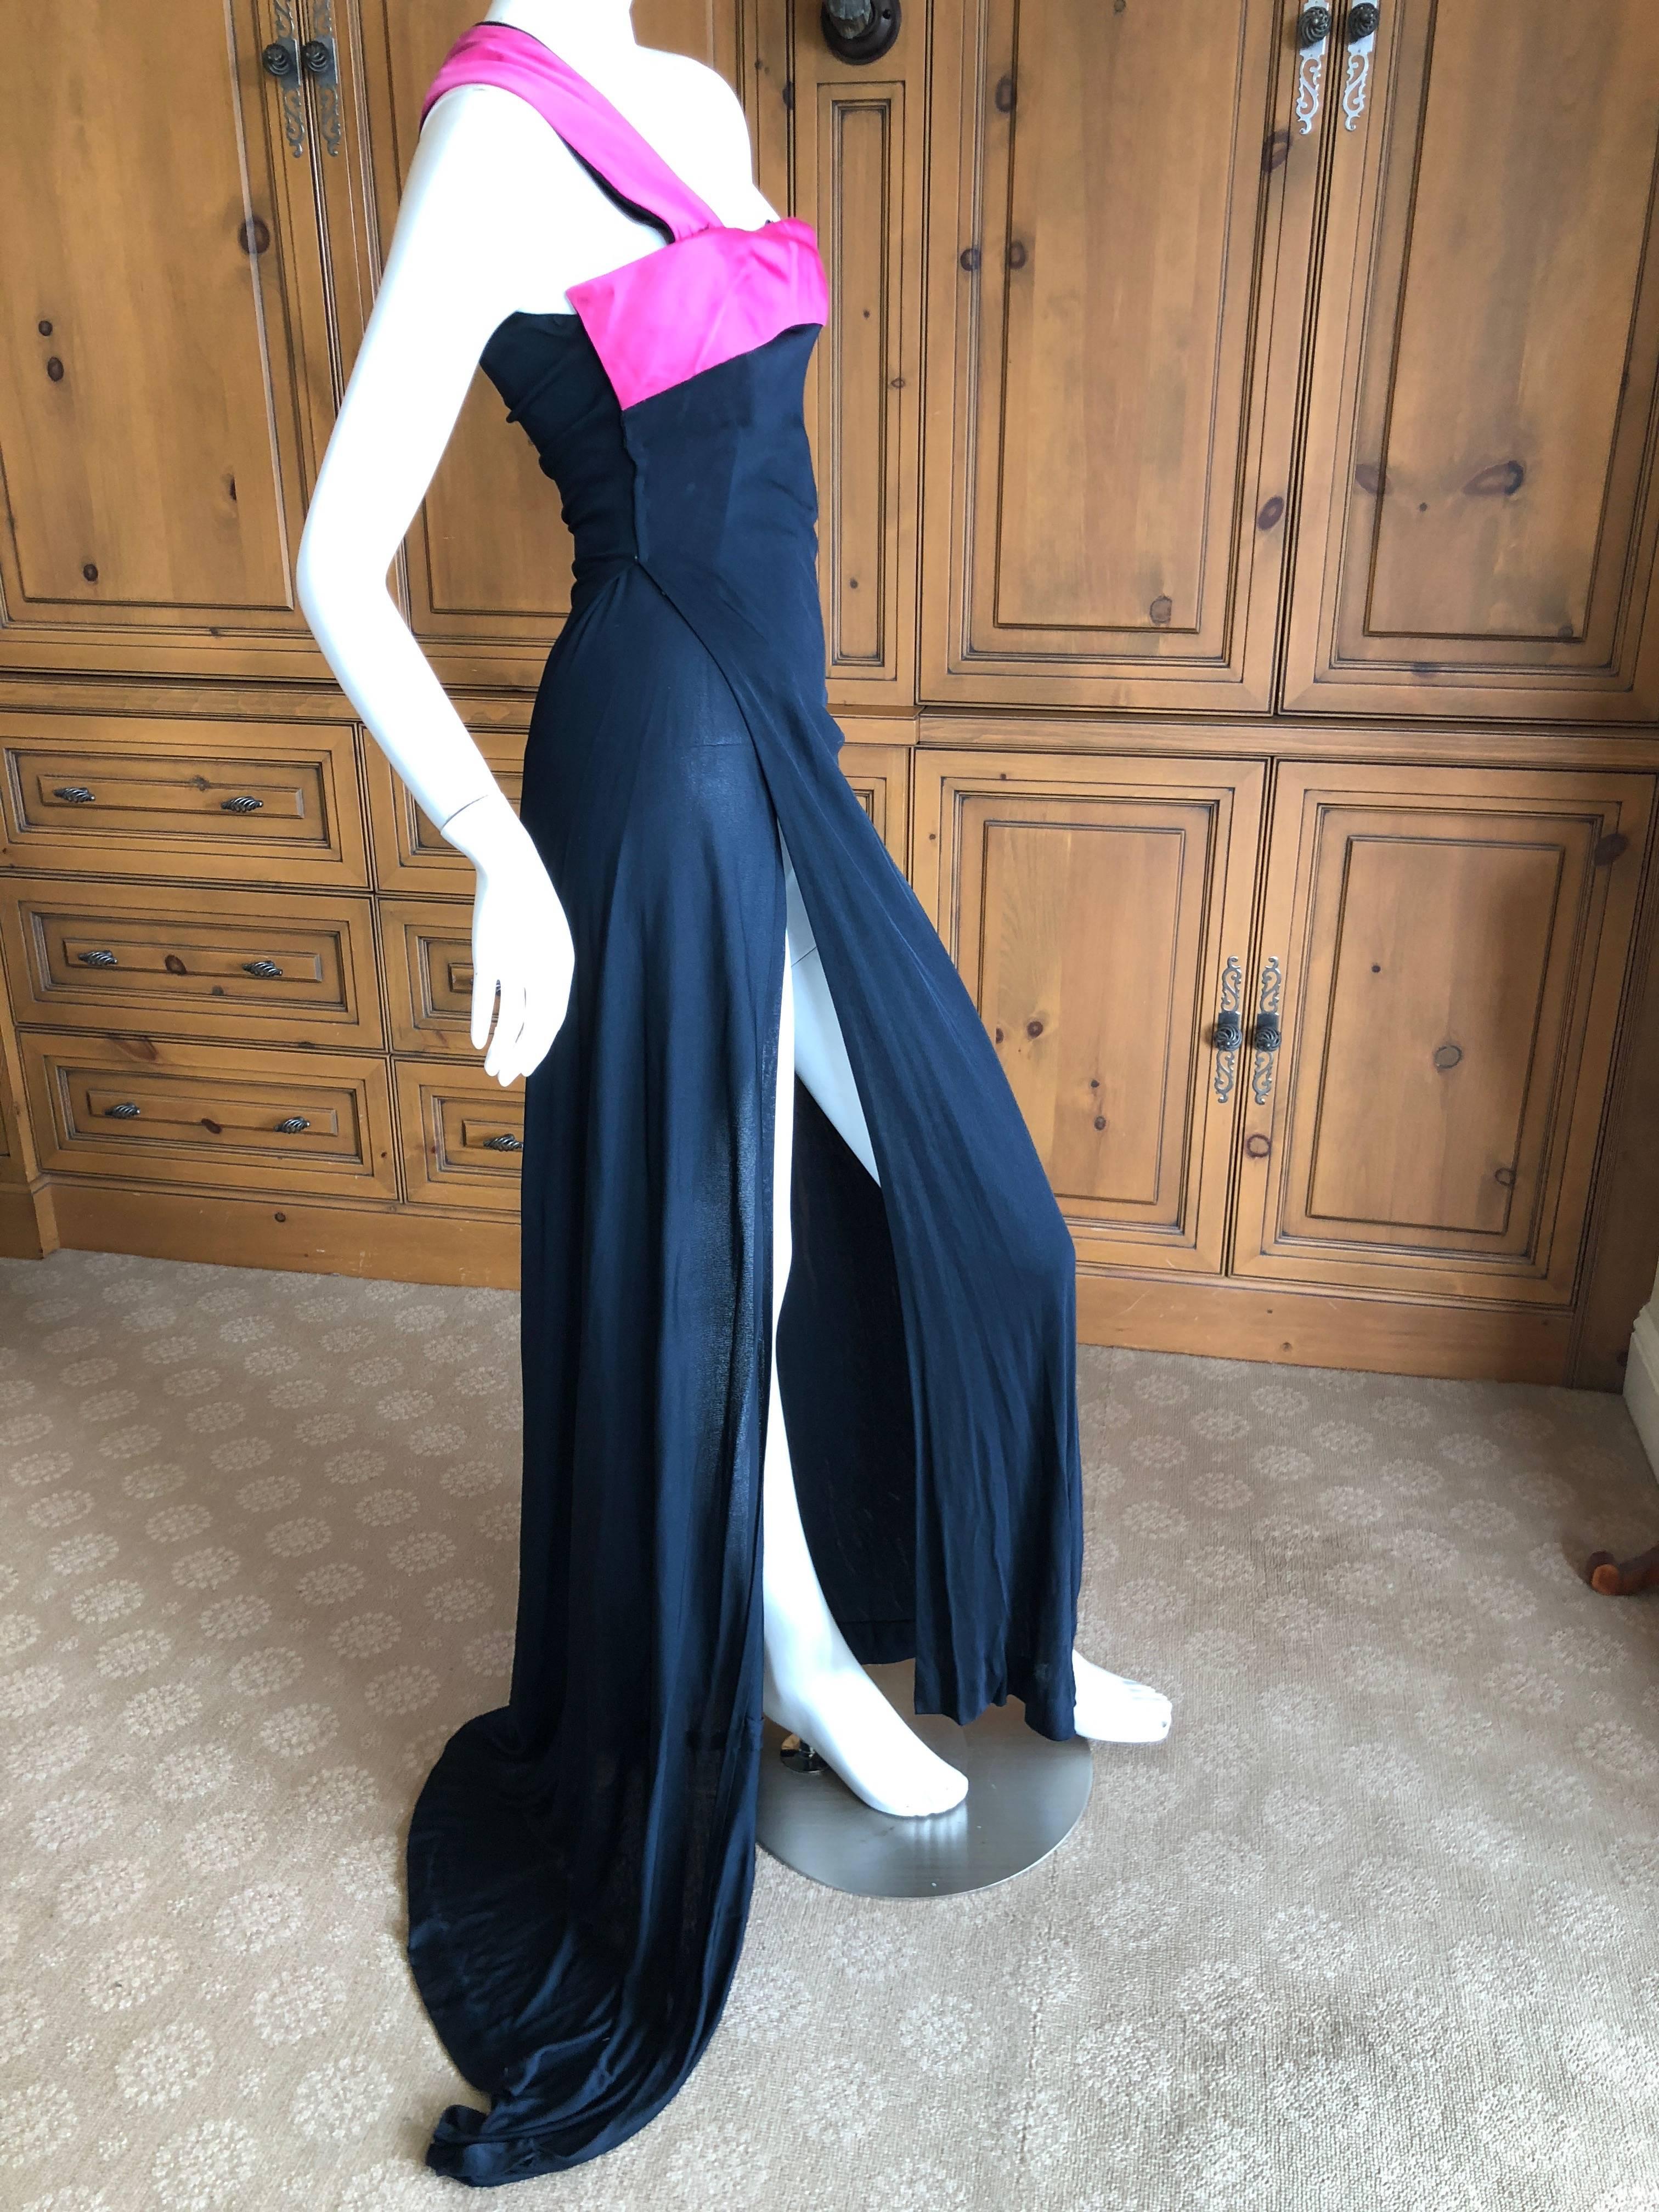 Cardinali 1975 Silk One Shoulder Evening Dress w High Slit and Matching Jacket

From the Archive of Marilyn Lewis, the creator of Cardinali
Cardinali was founded in Los Angeles in 1970, by Marilyn Lewis, who had already found success as the founder